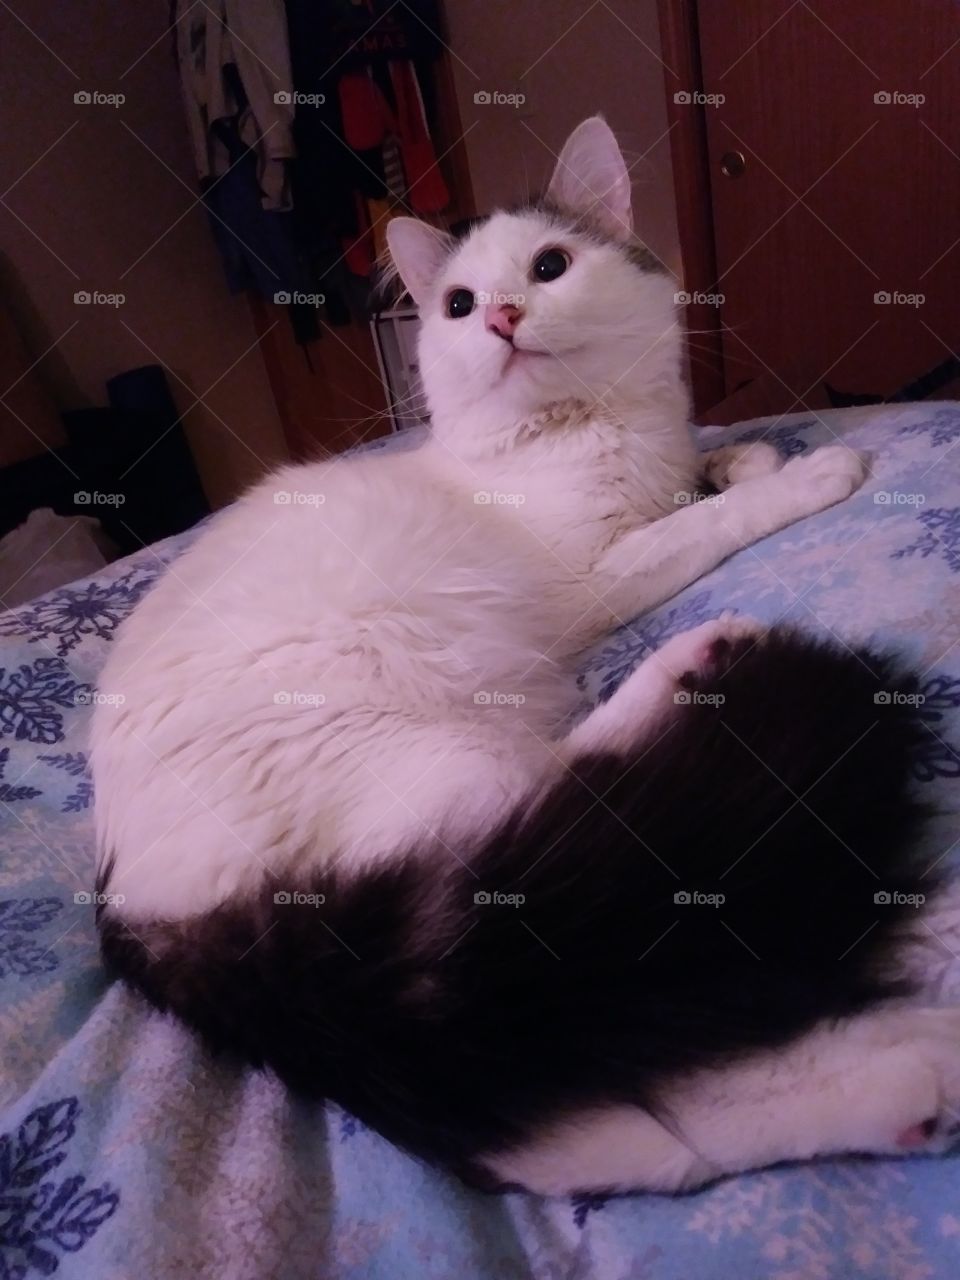 A handsome white cat named Cloud relaxing on a bed